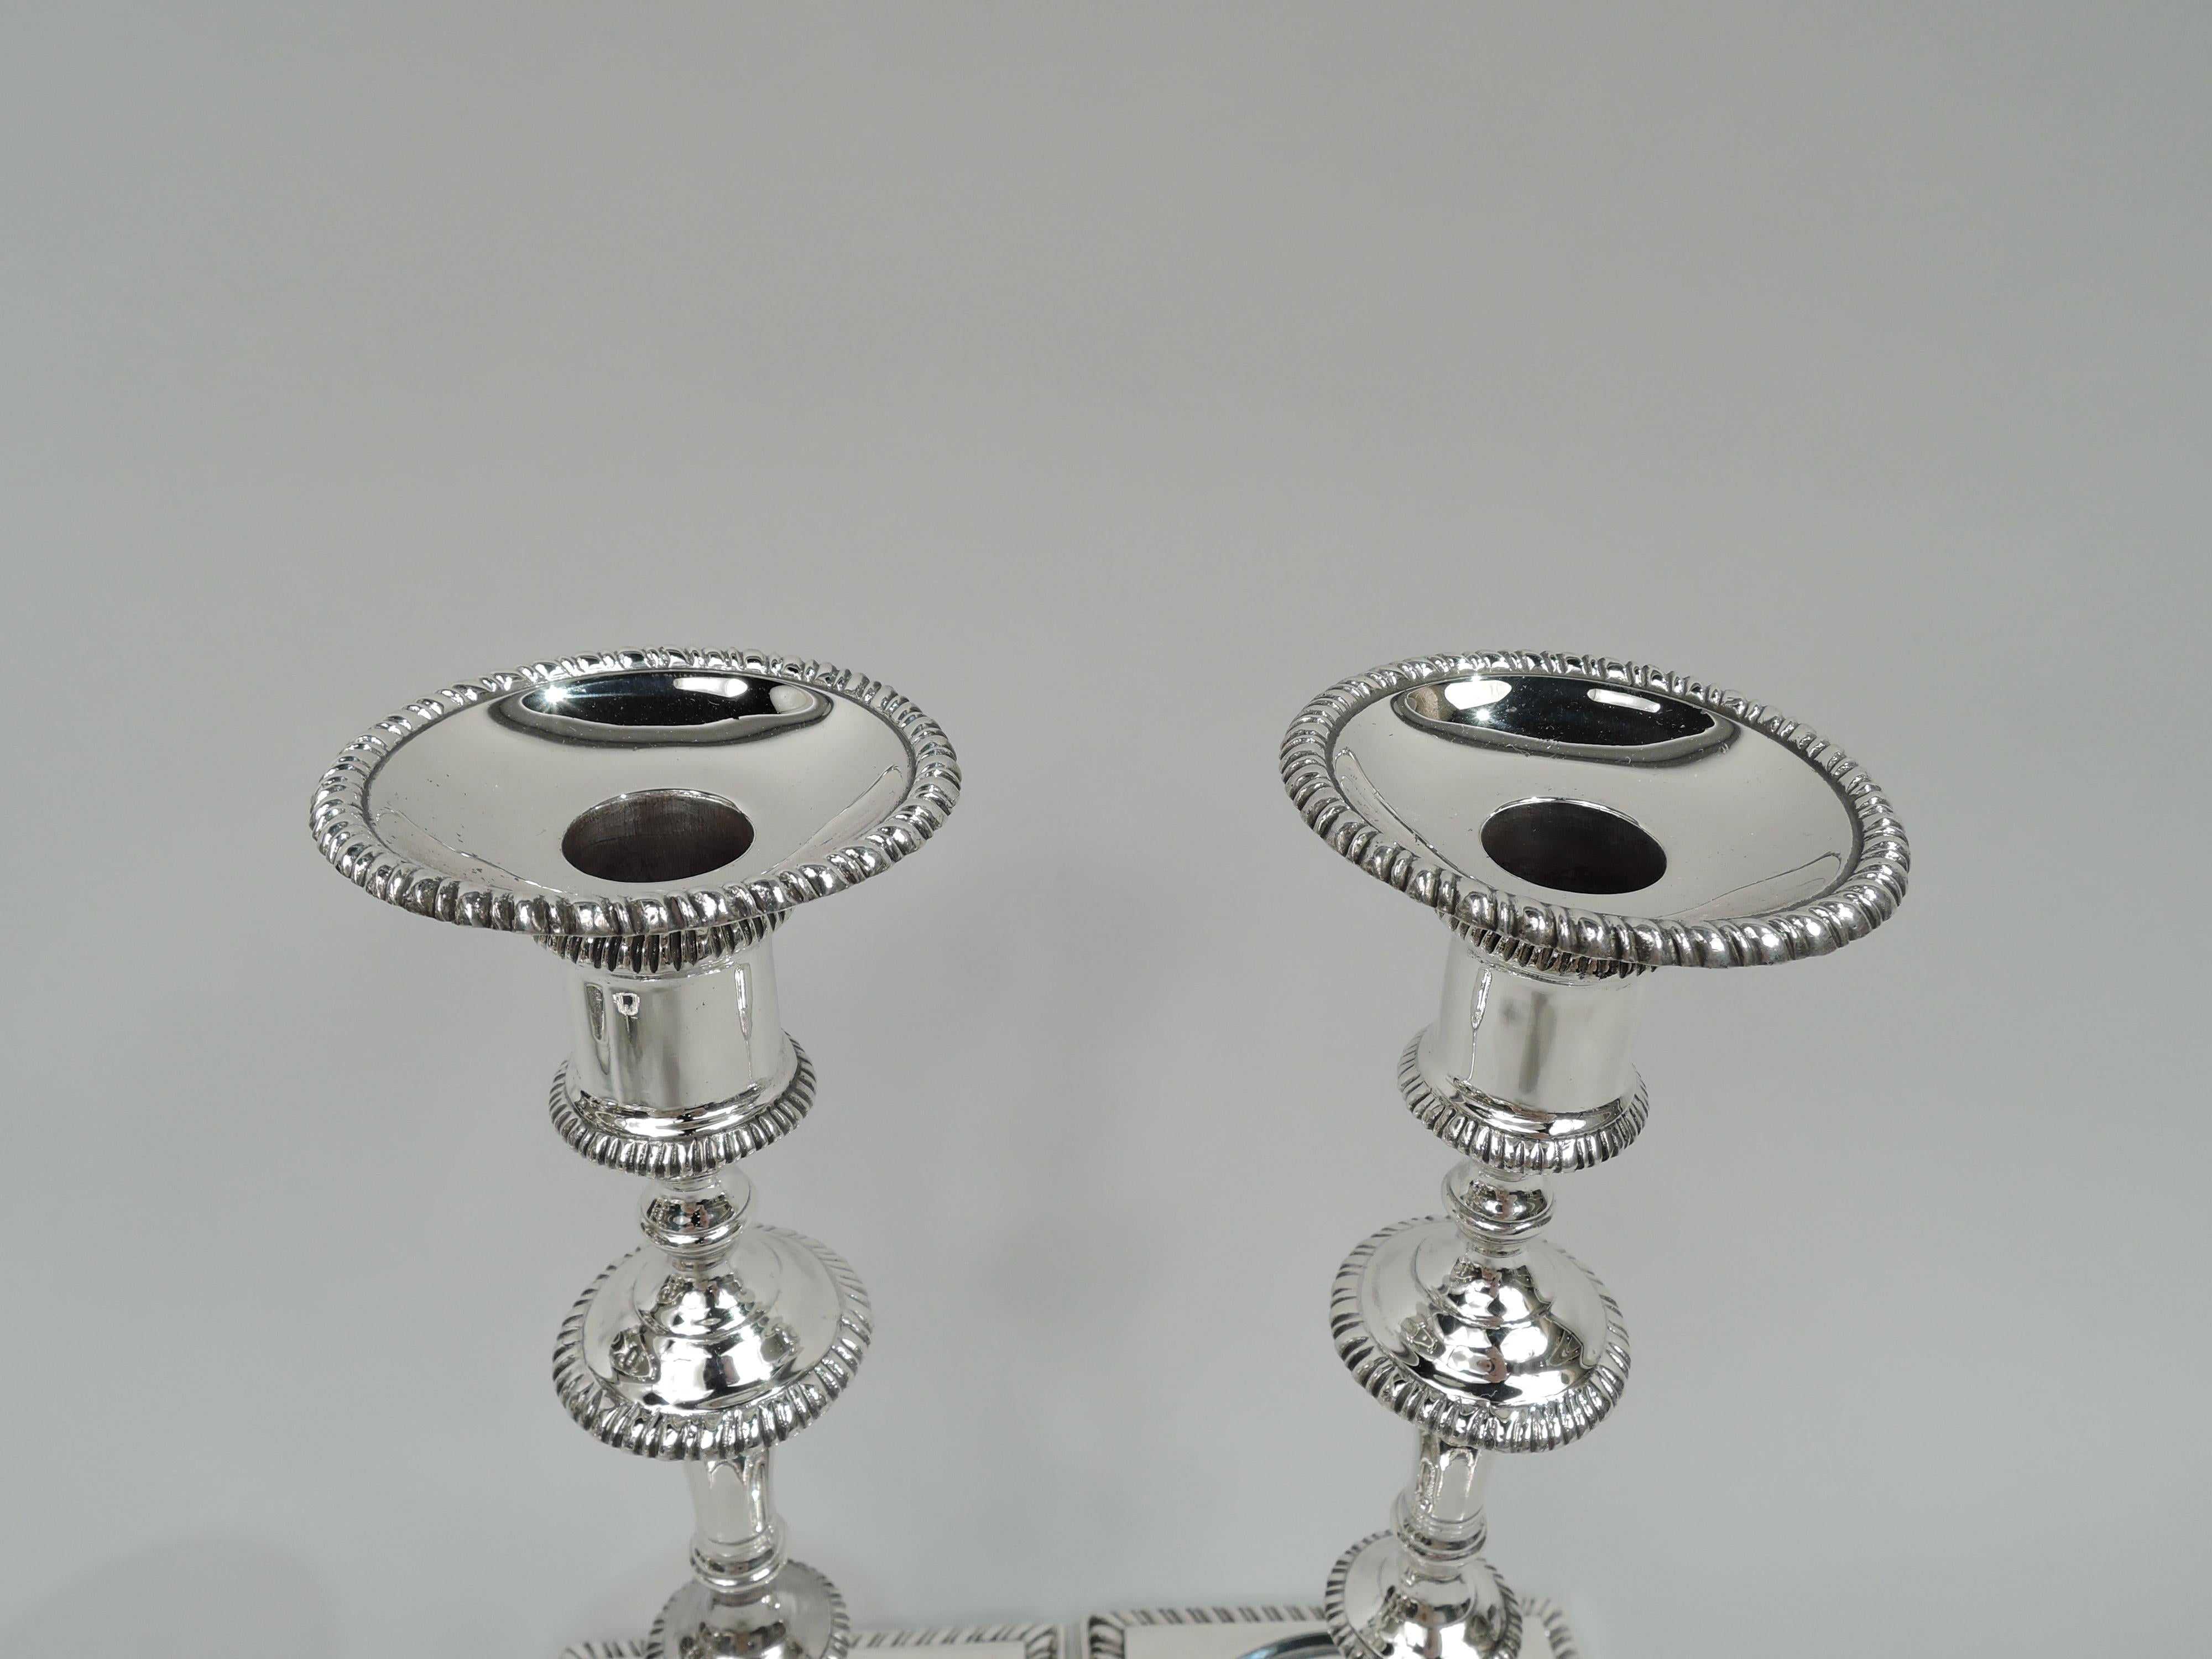 Traditional Georgian-style sterling silver candlesticks, circa 1950. Each: spool socket with detachable bobeche on knopped and flanged shaft; foot square. Gadrooned rims. Fully marked including stamp for Prill Silver Co., Inc. a New York maker